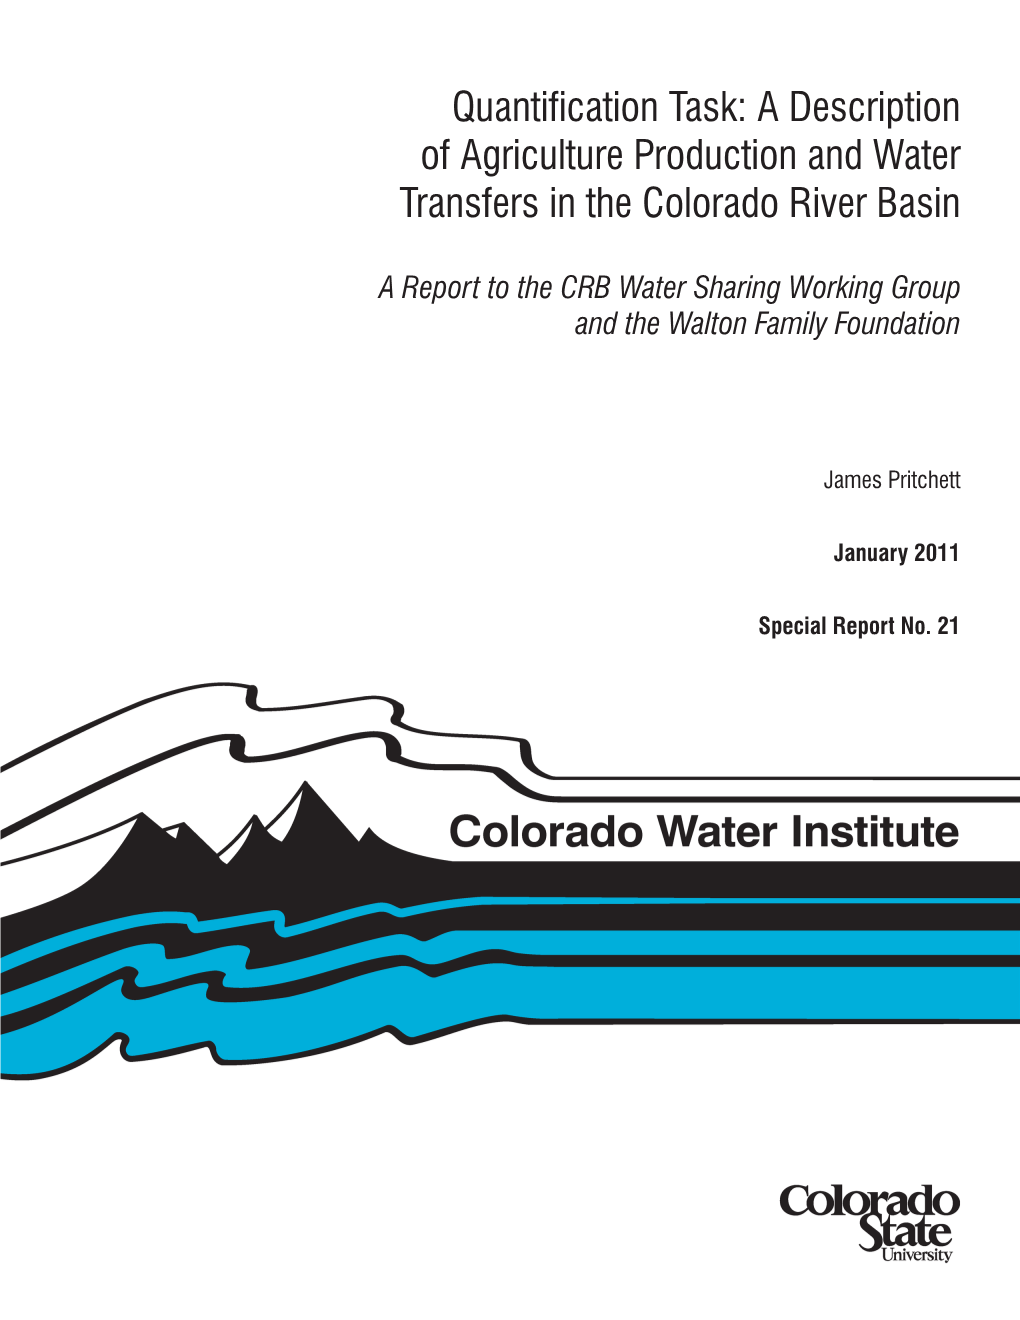 A Description of Agriculture Production and Water Transfers in the Colorado River Basin